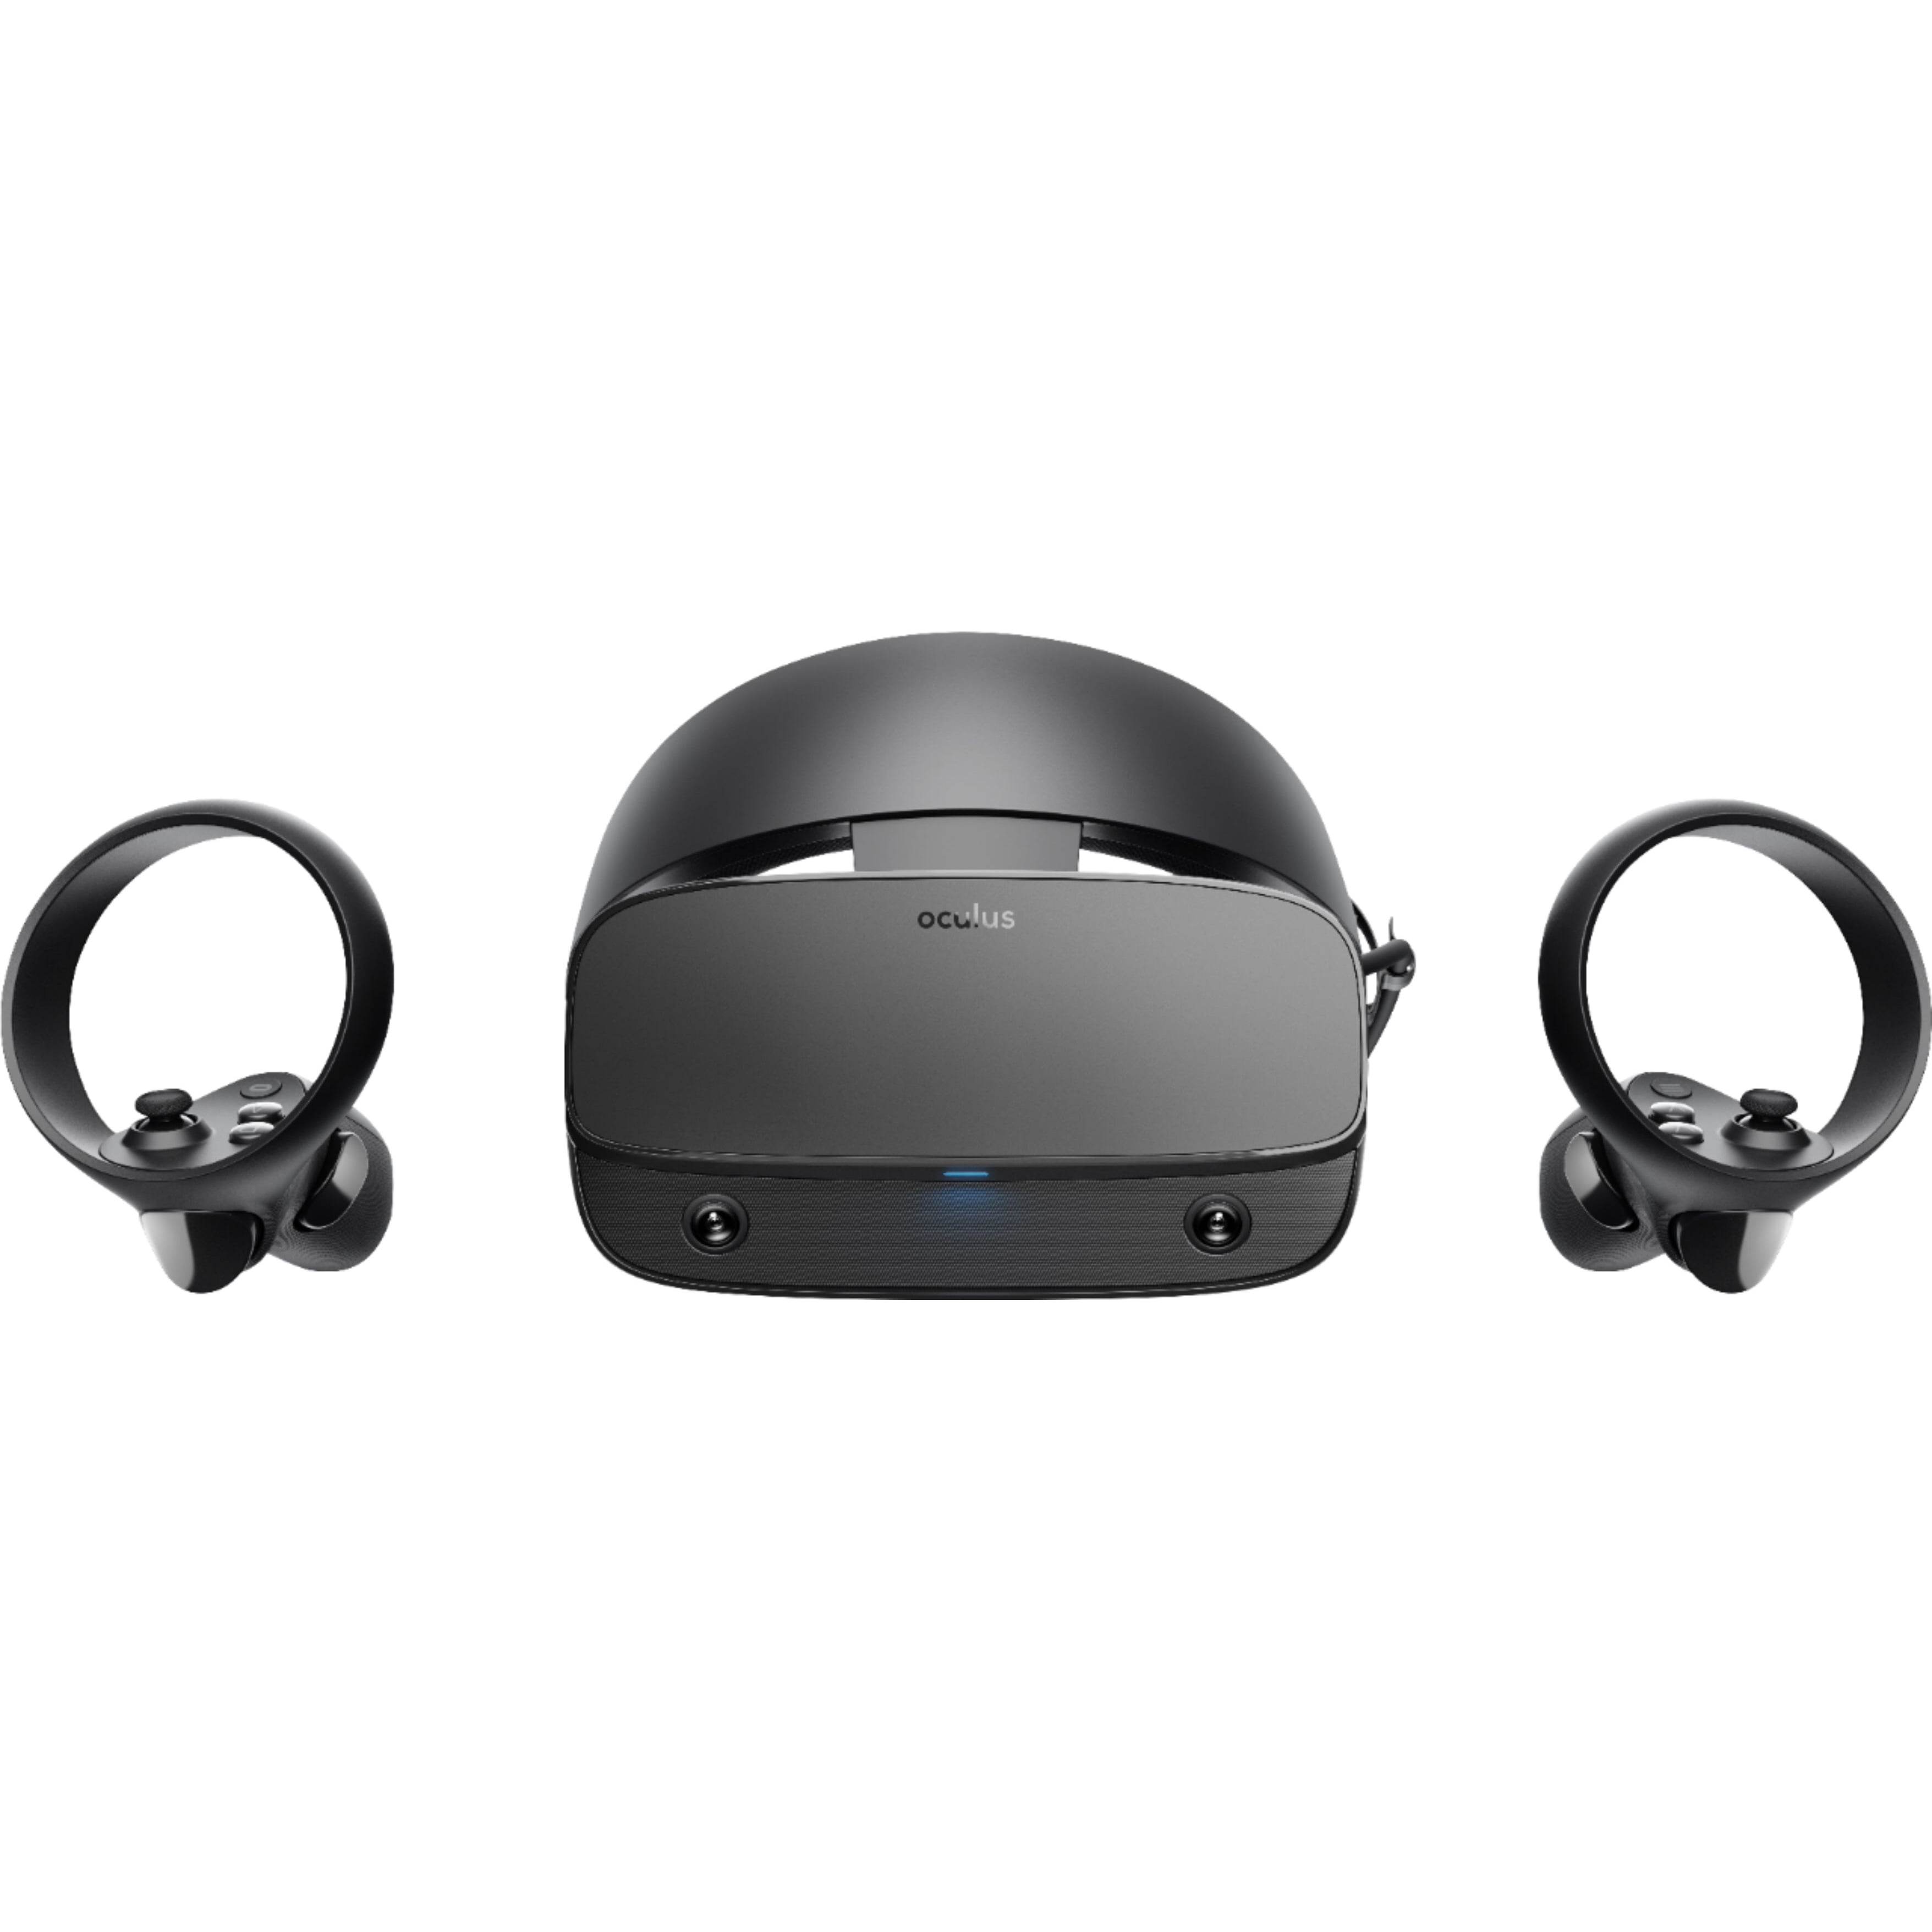 Oculus Rift S PC VR Headset Black Touch Controller, 3D Positional Audio, Built-in Insight Tracking, Fit Wheel Adjustable Halo Headband - Walmart.com